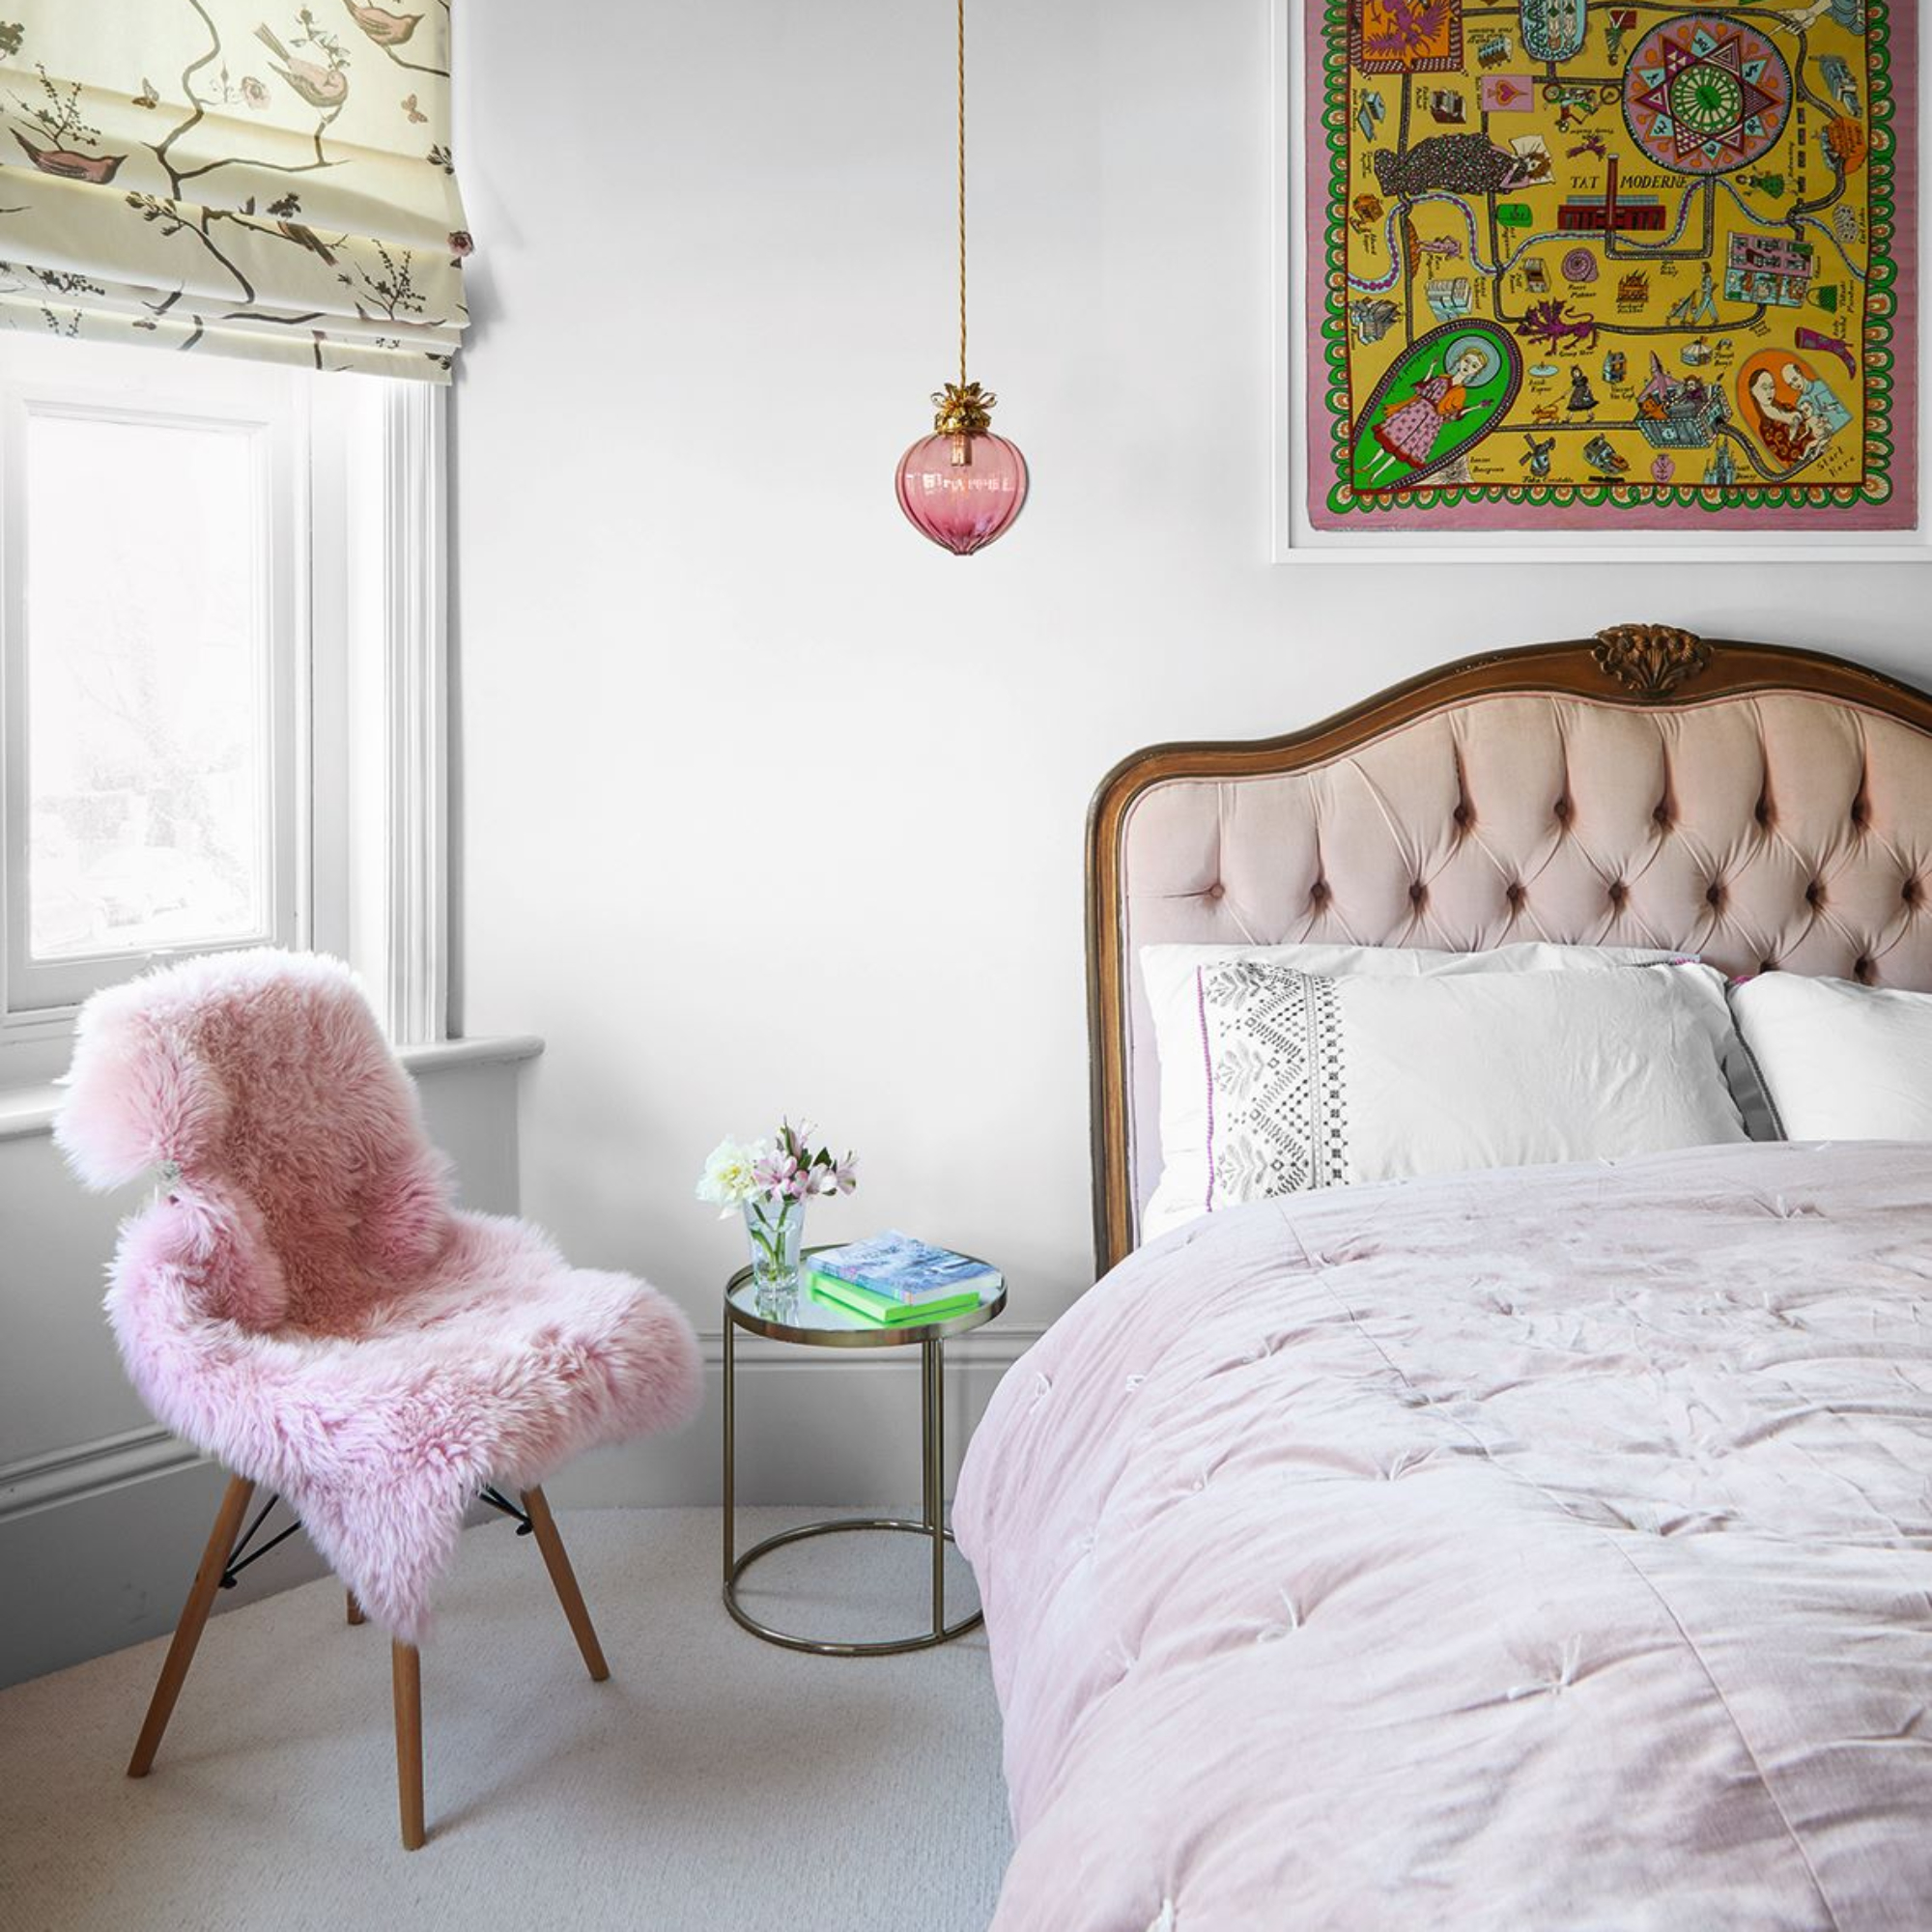 Padded bedstead and animal fleece in pale pink draped over chair in bedroom with bird pattern Roman blind and accent colour yellow tapestry on wall